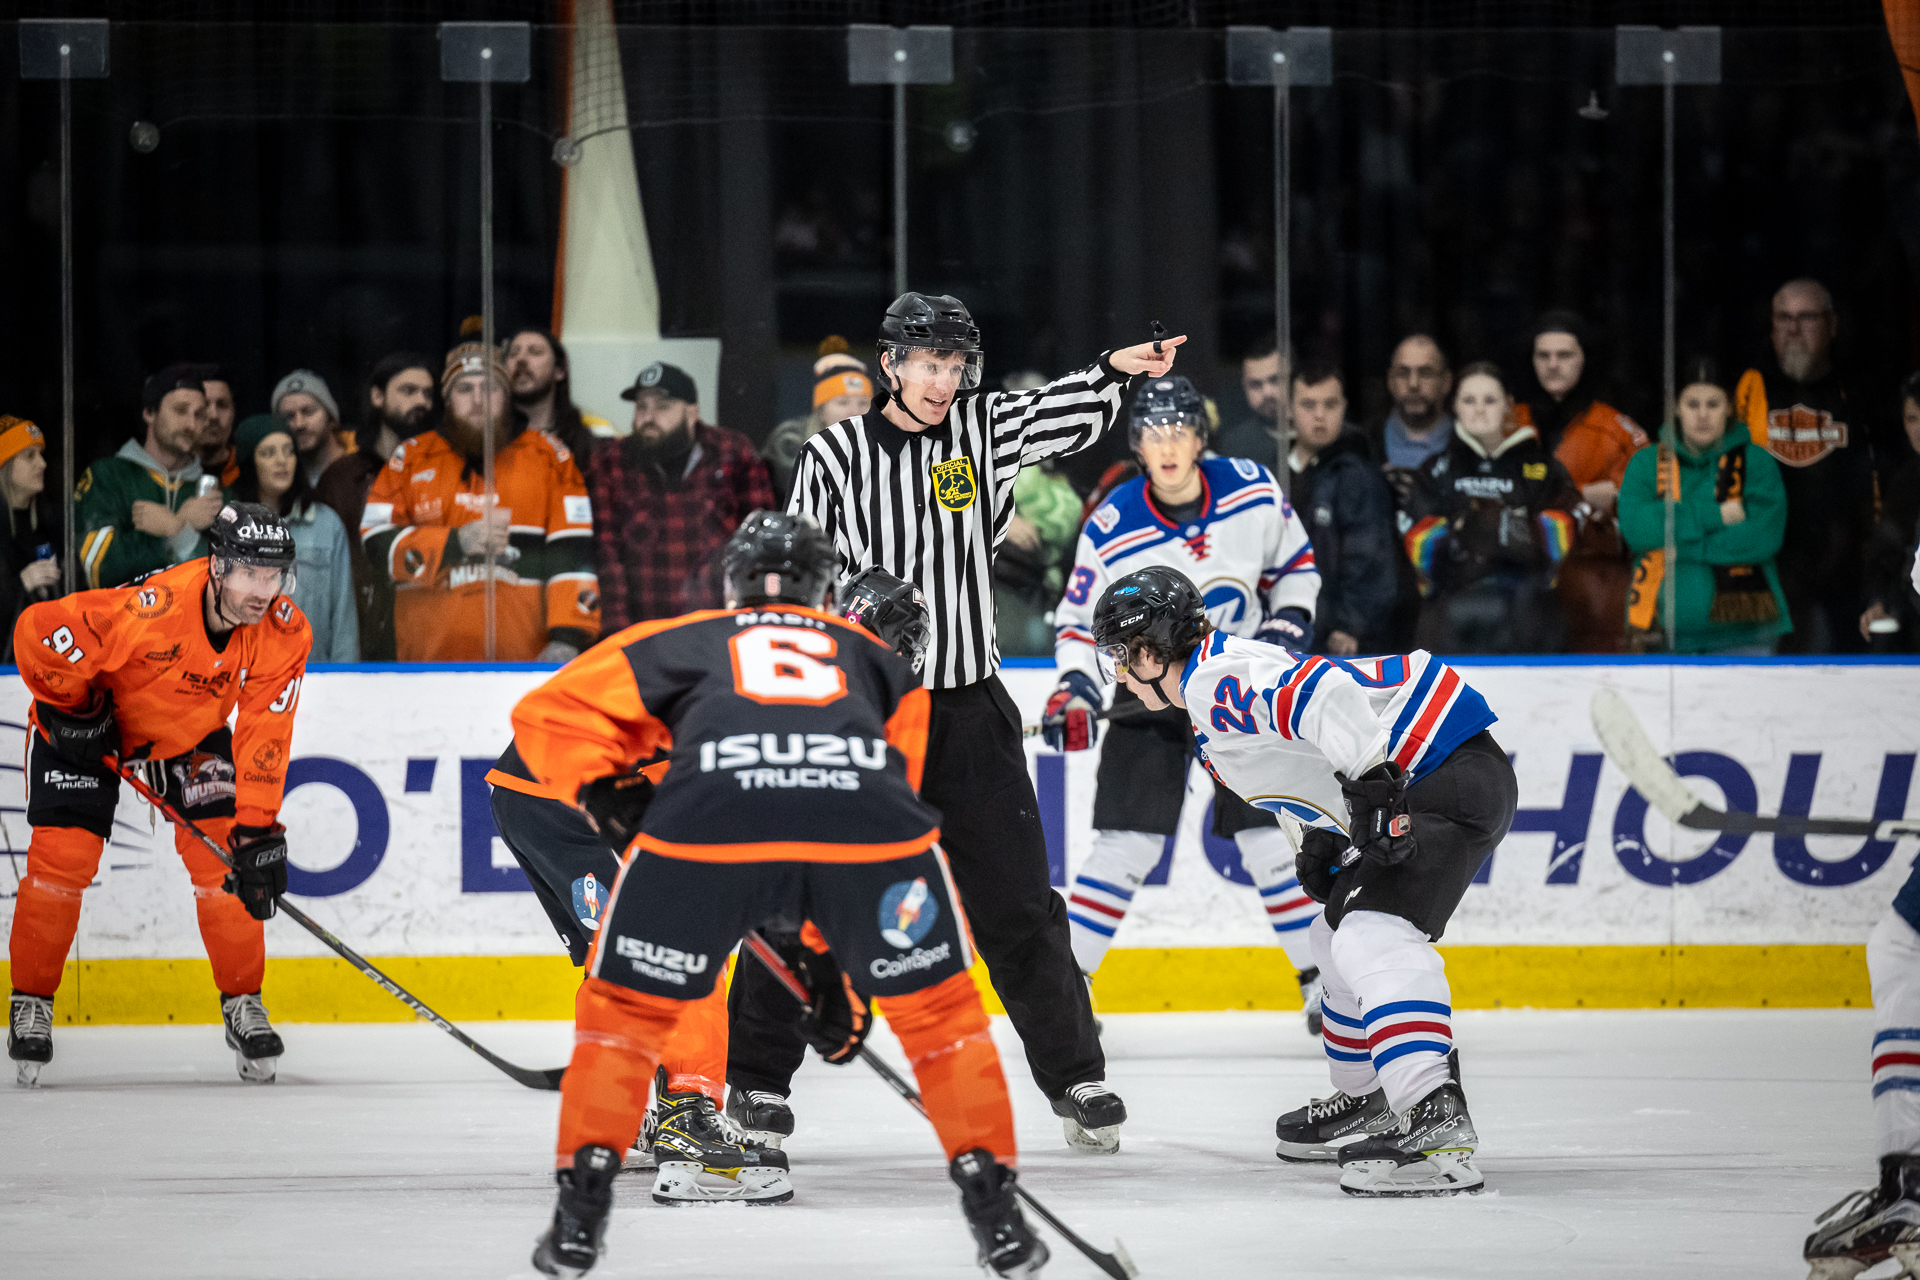 The AIHL’s most hard-fought rivalry?